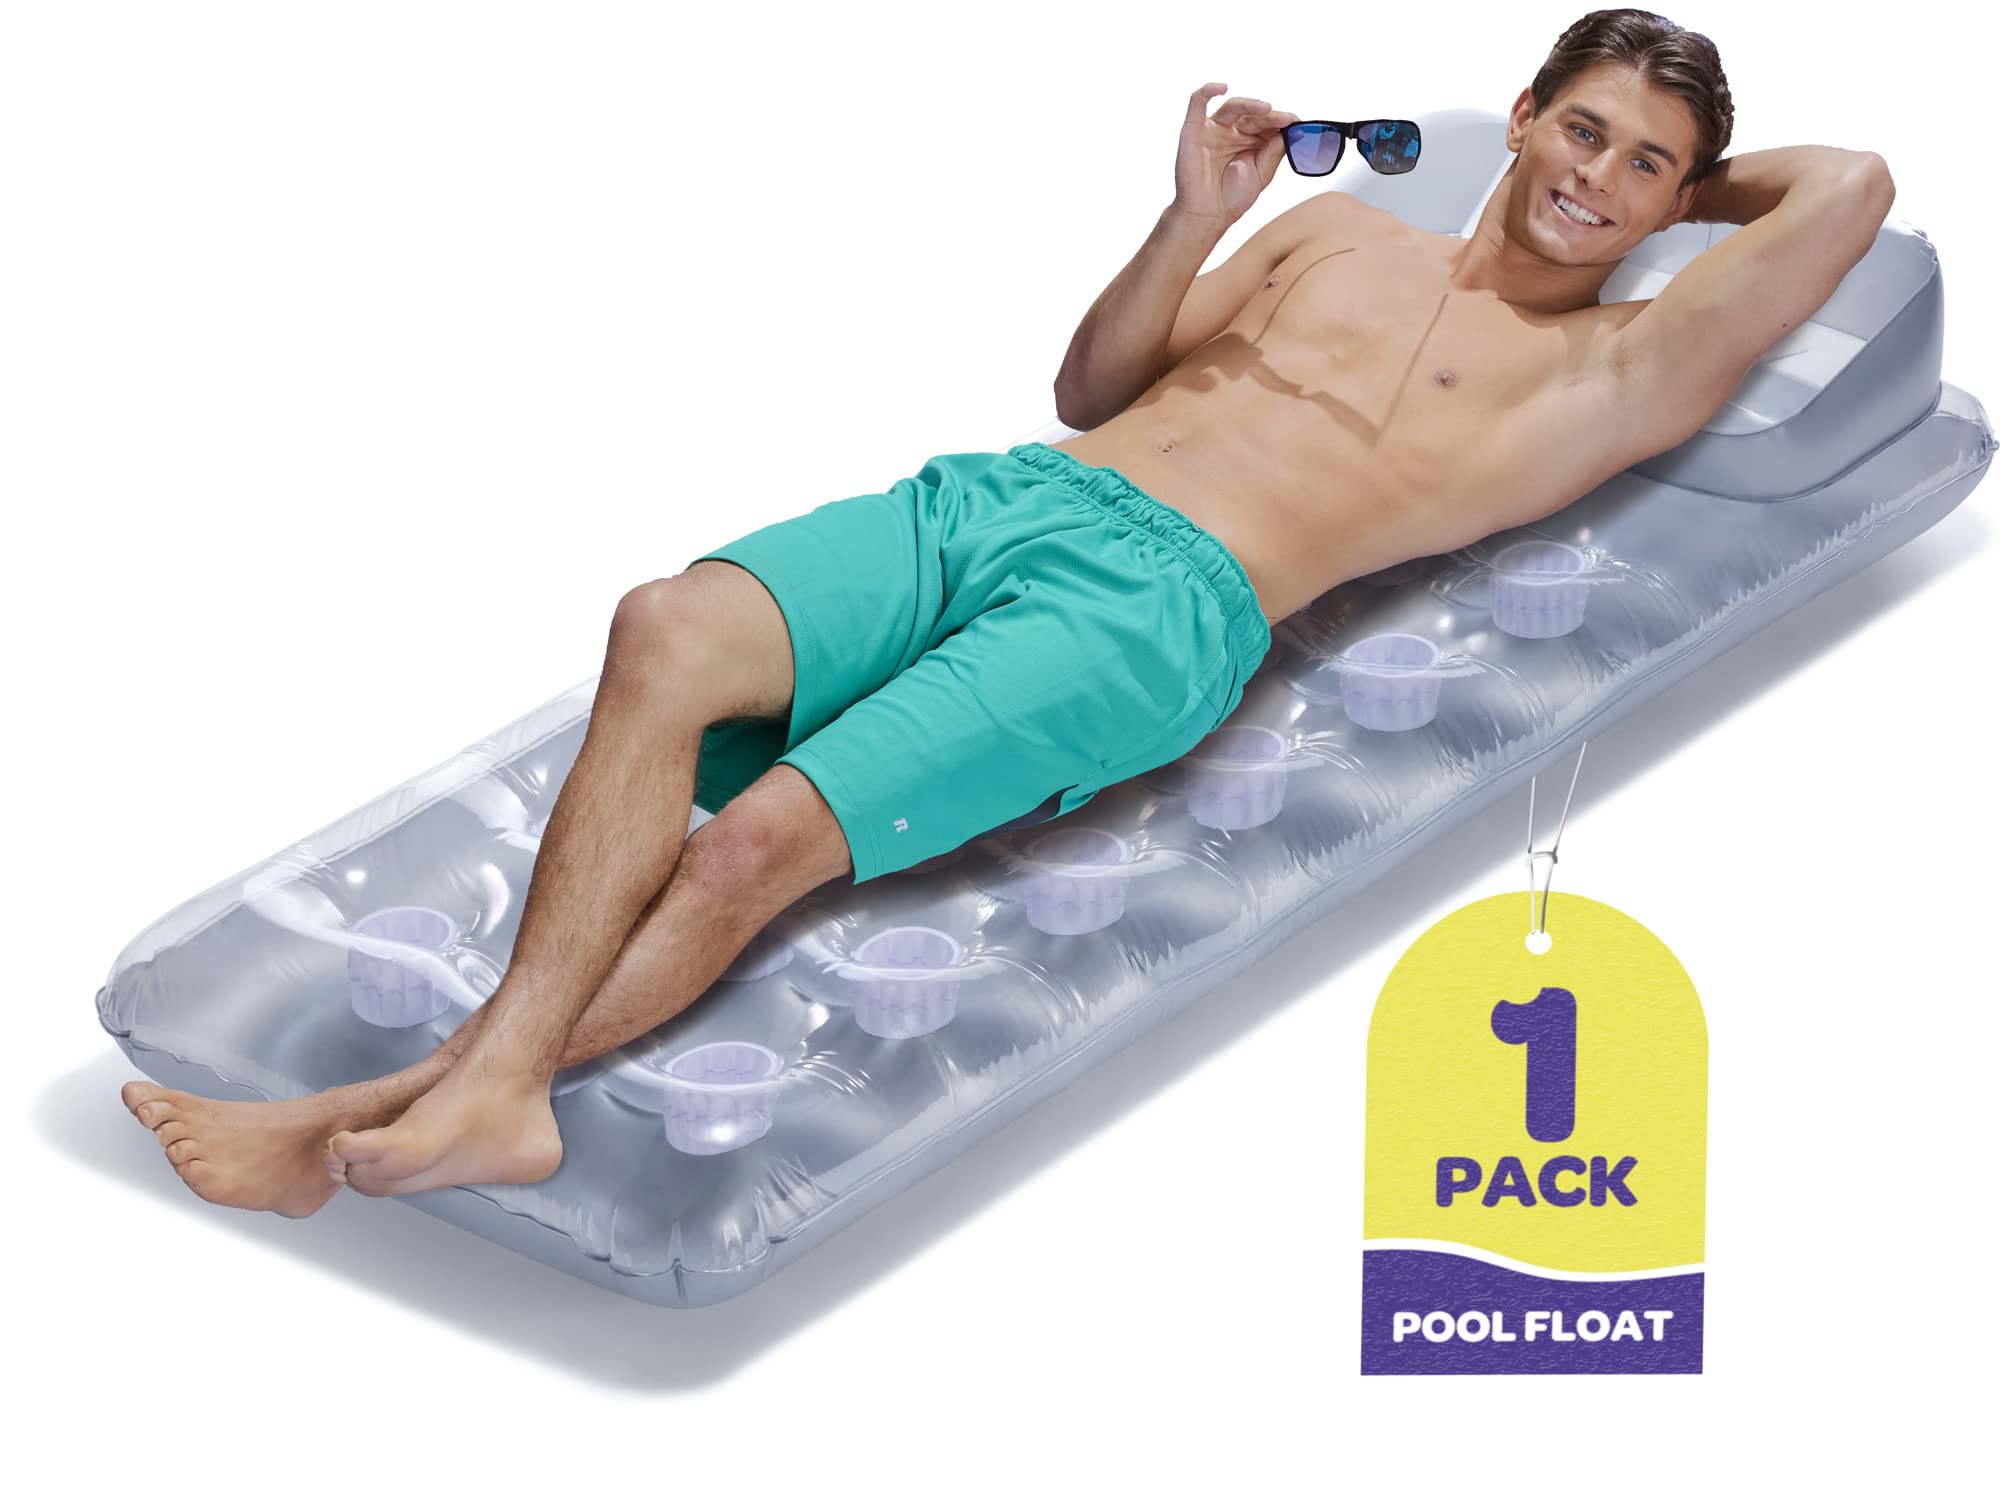 Inflatable Pool Lounger 74” X 28” Pool Floats with Headrest, 18-Pocket Suntanner Lounge Grey Color. Silver Bottom/Clear Top - Inflatable Pool Rafts for Adults, Bundled with SEWANTA Duckie  - Like New